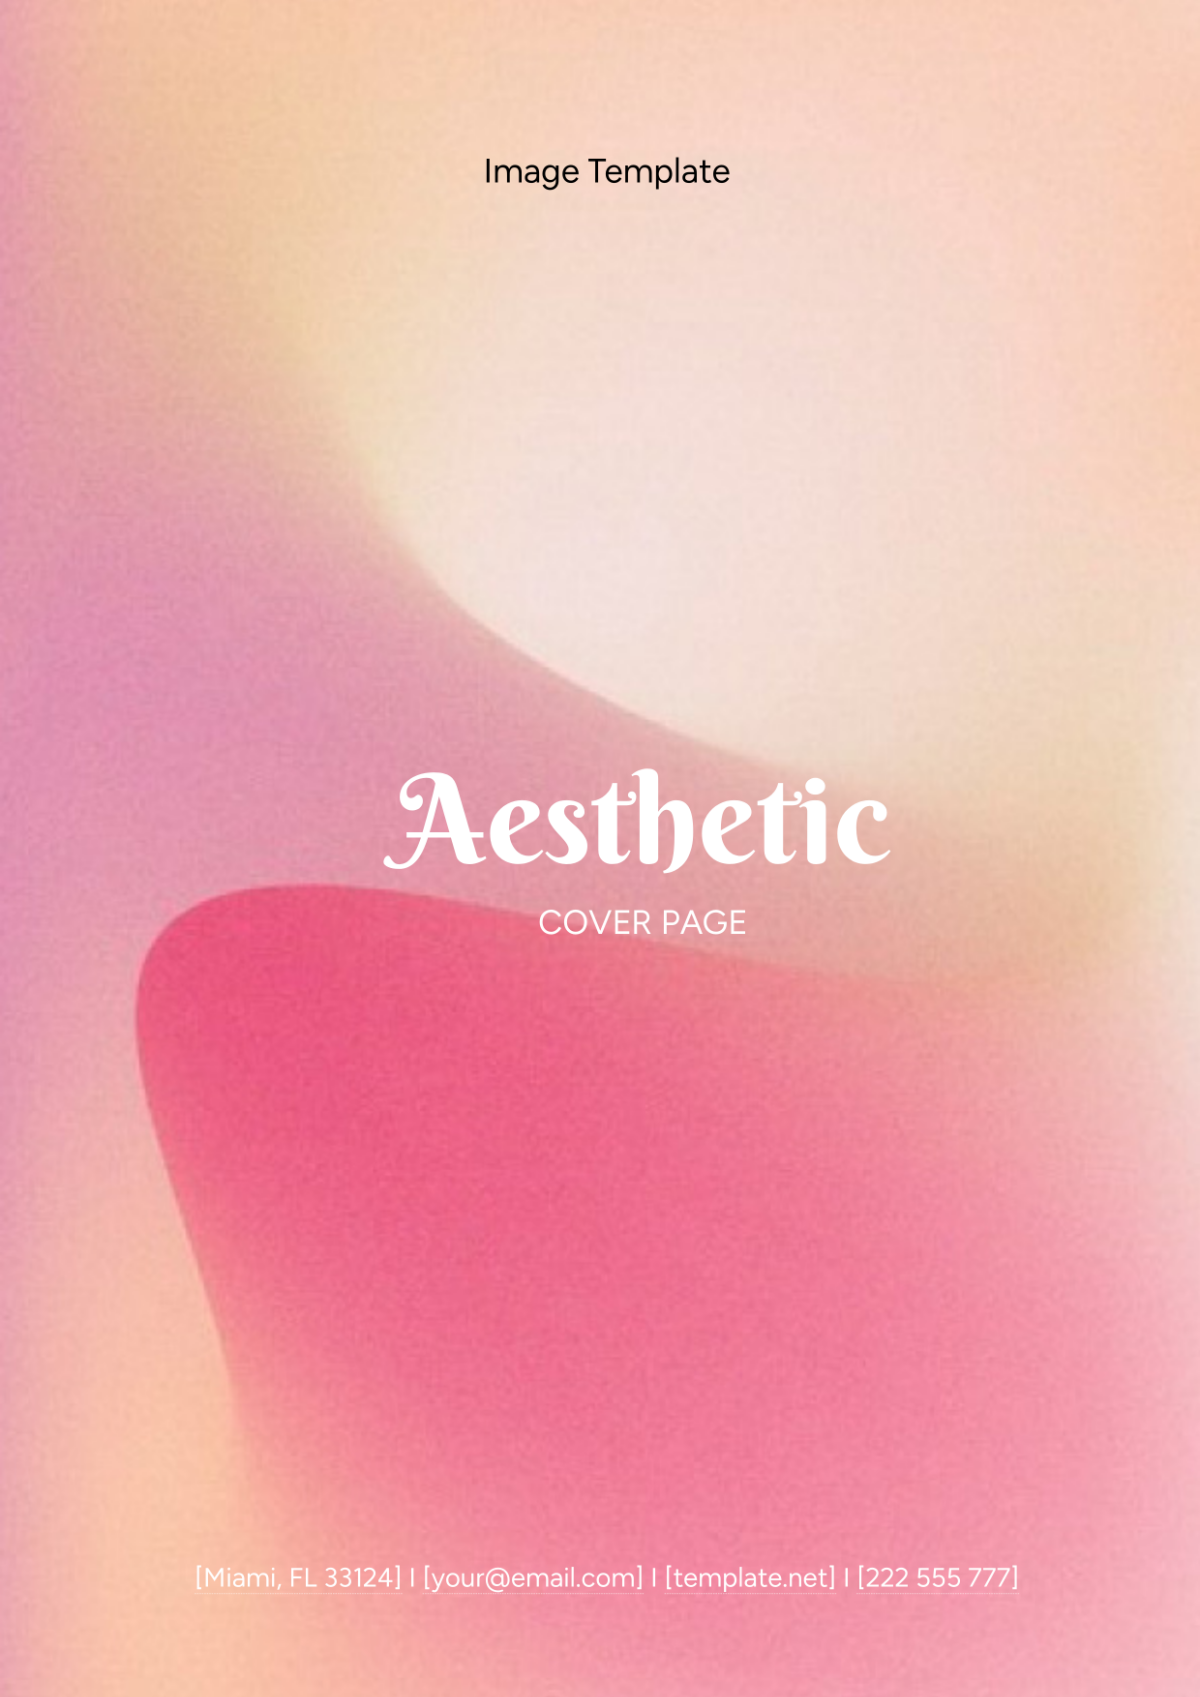 Aesthetic Cover Page Image Template